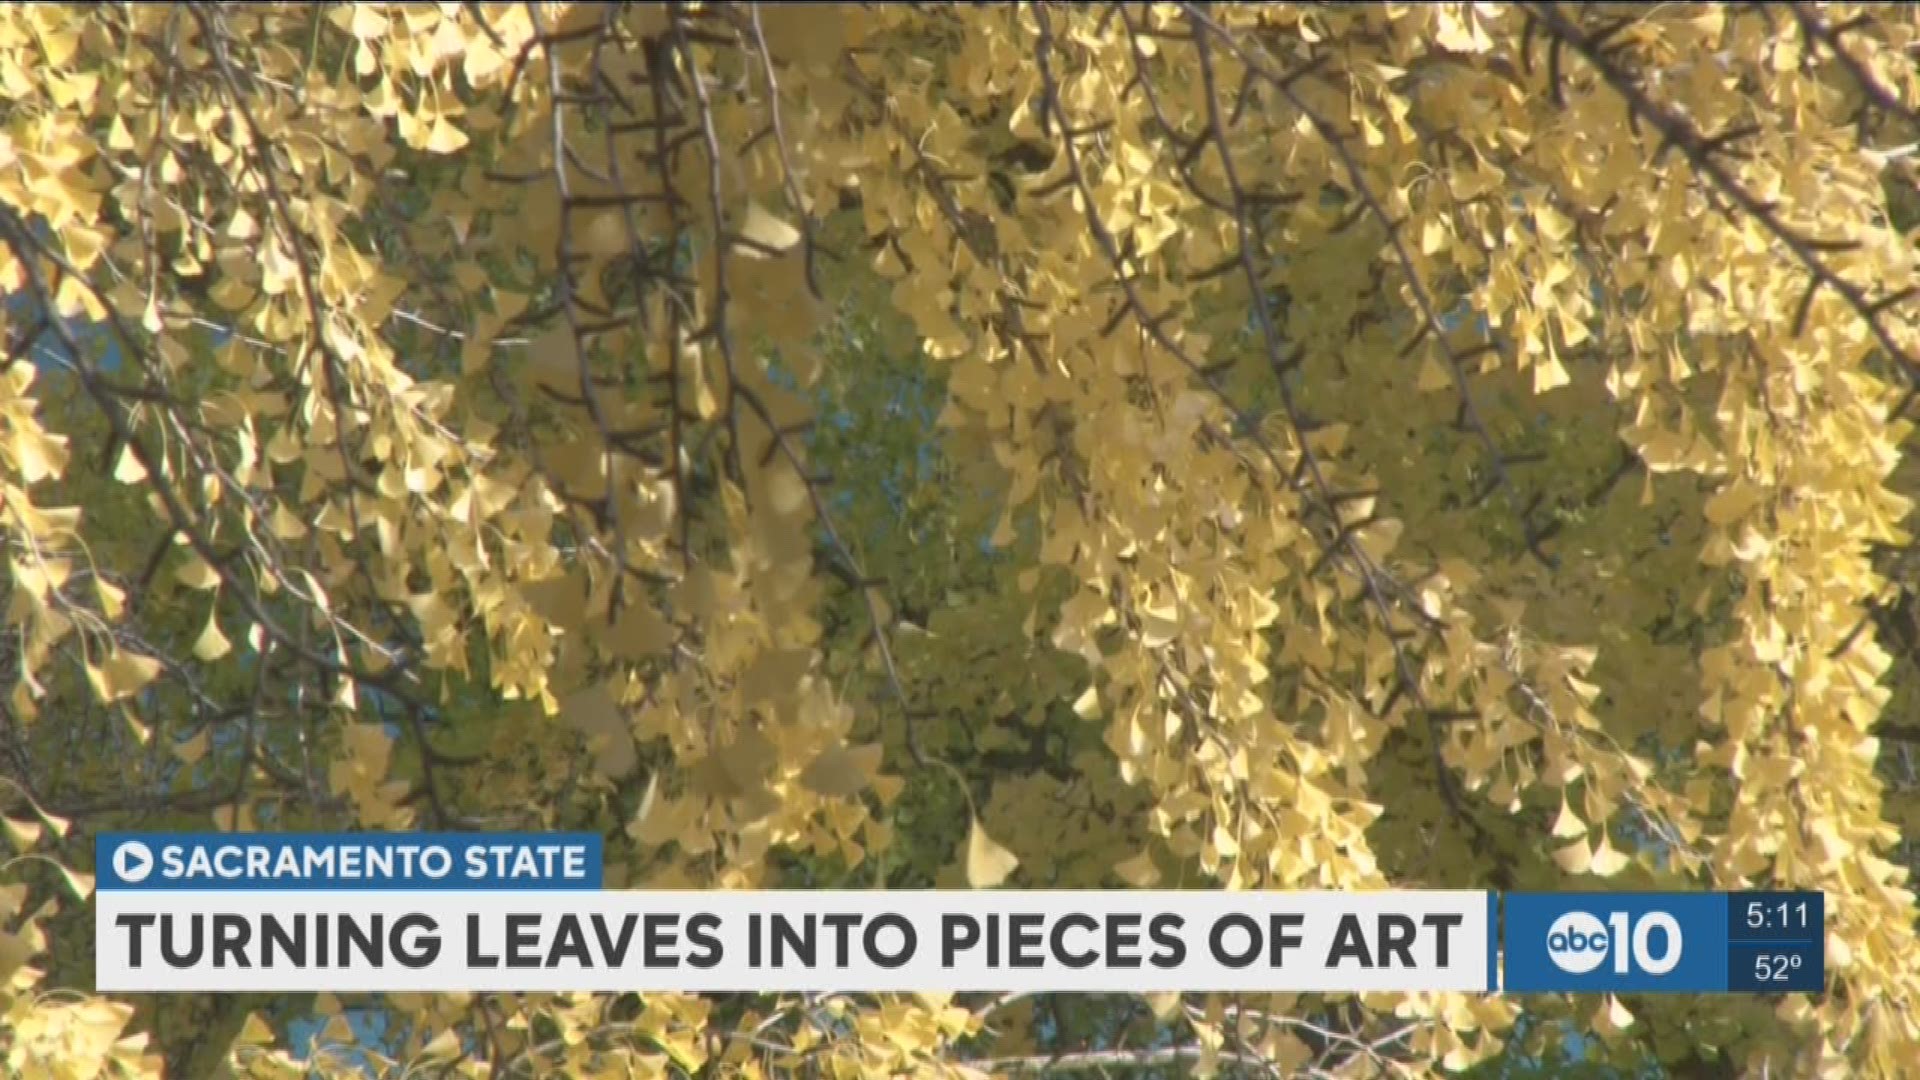 Each fall for the past four years Joanna Hedrick arranges leaves, one by one, into works of art. (Nov. 23, 2016)